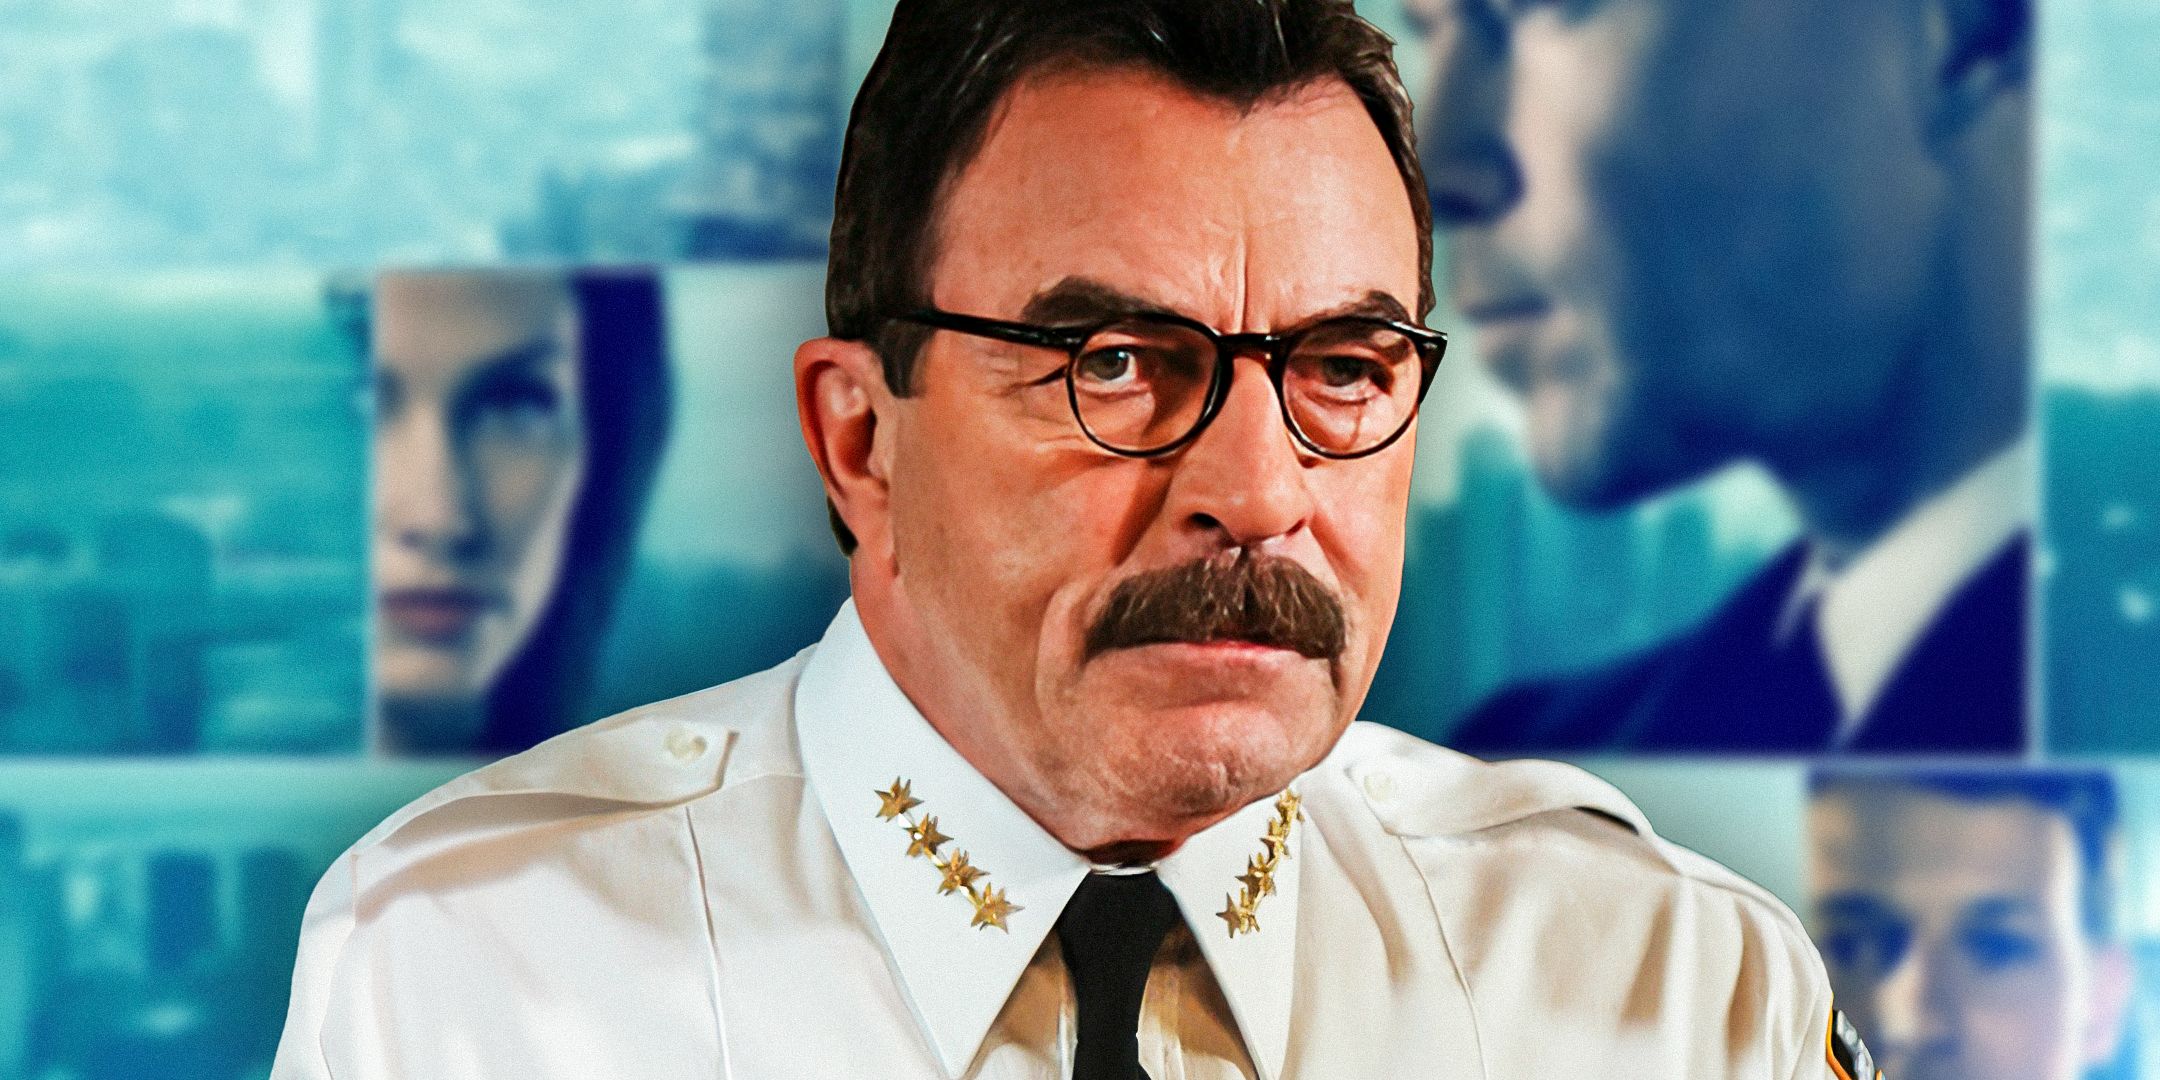 Tom Selleck as Blue Bloods' Frank Reagan, wearing a white shirt with four gold stars on each lapel of his collar